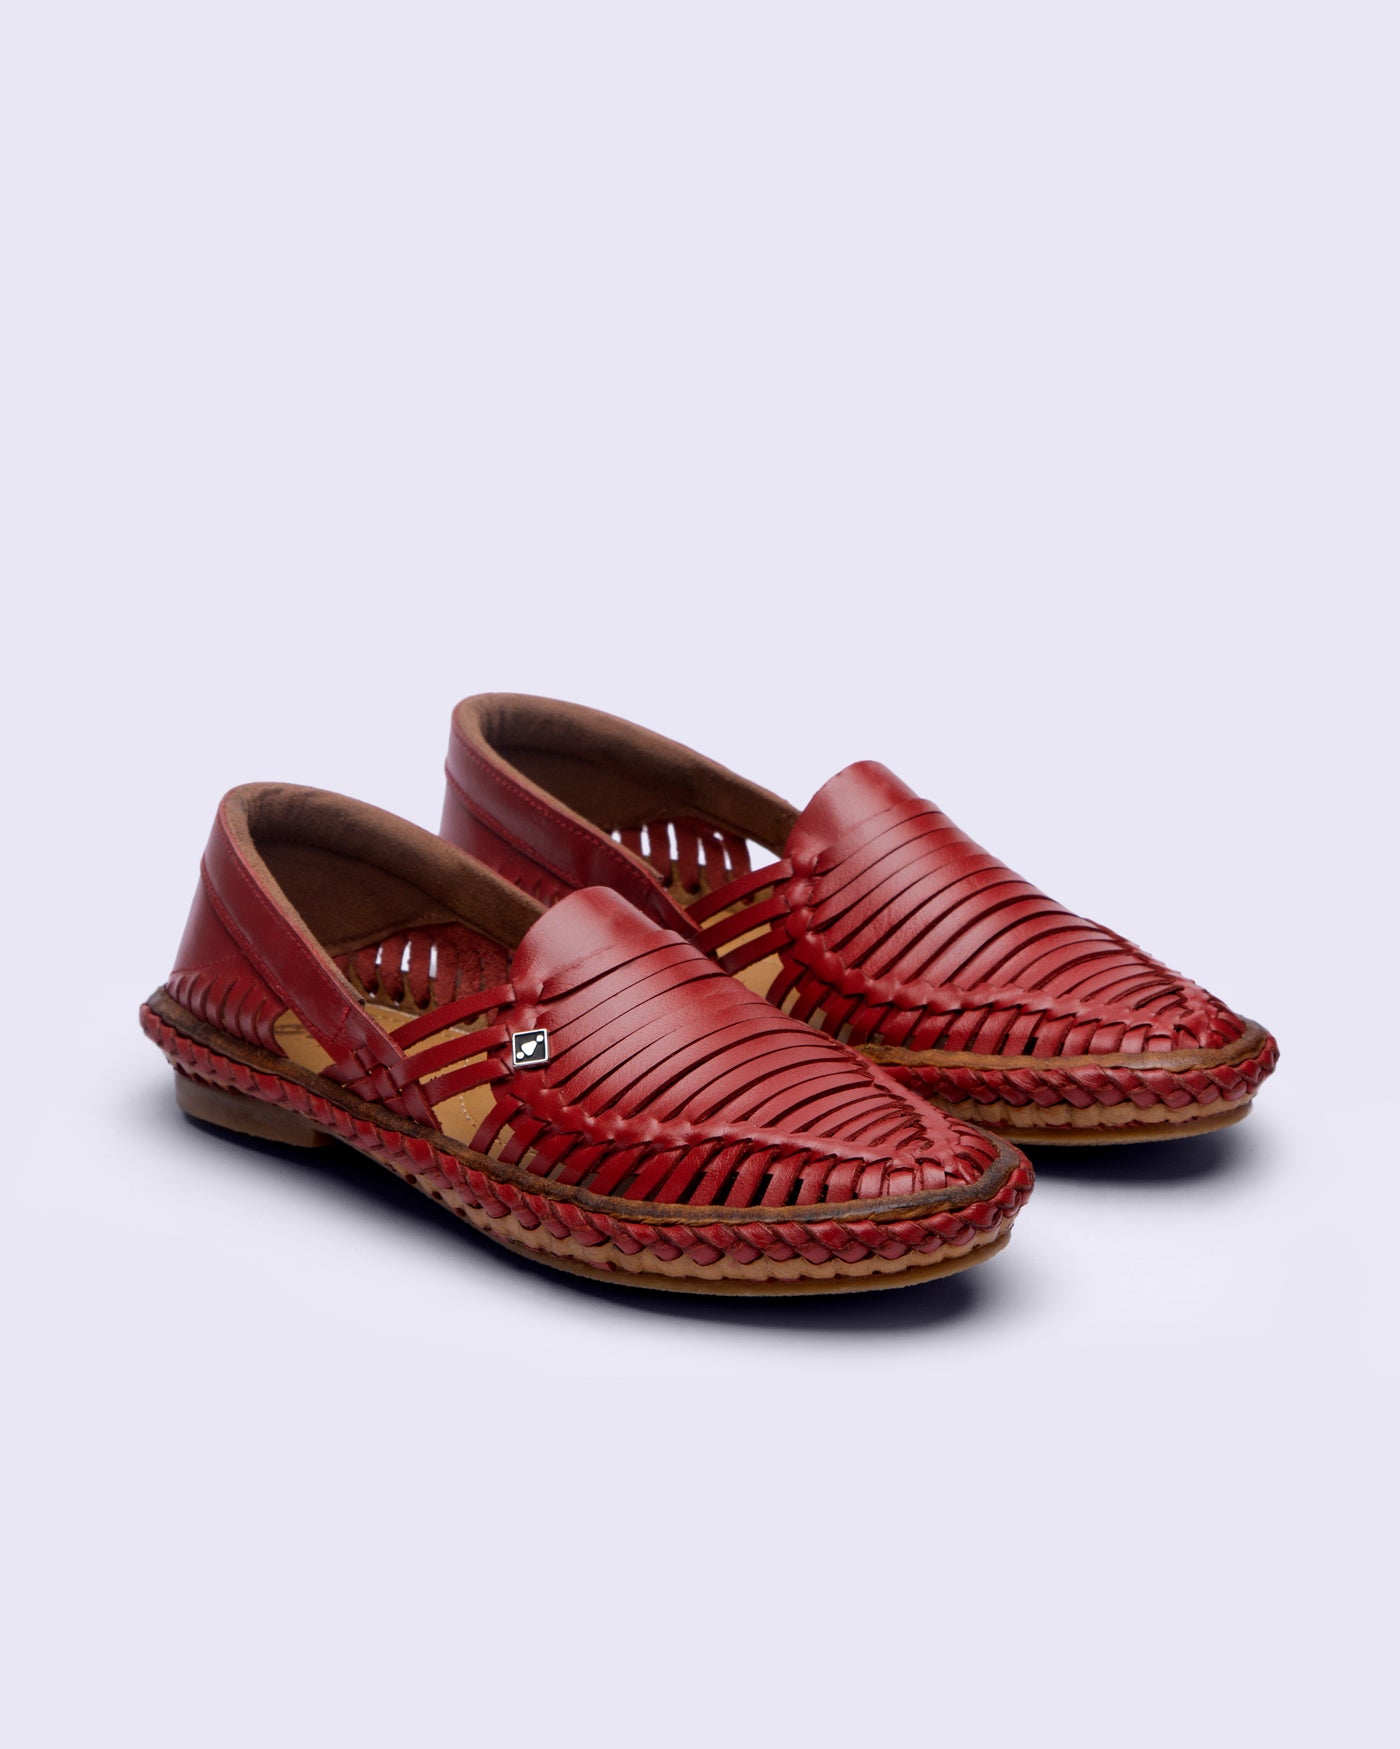 Fireworkshouse-handmade-leather-shoes-REINA RED